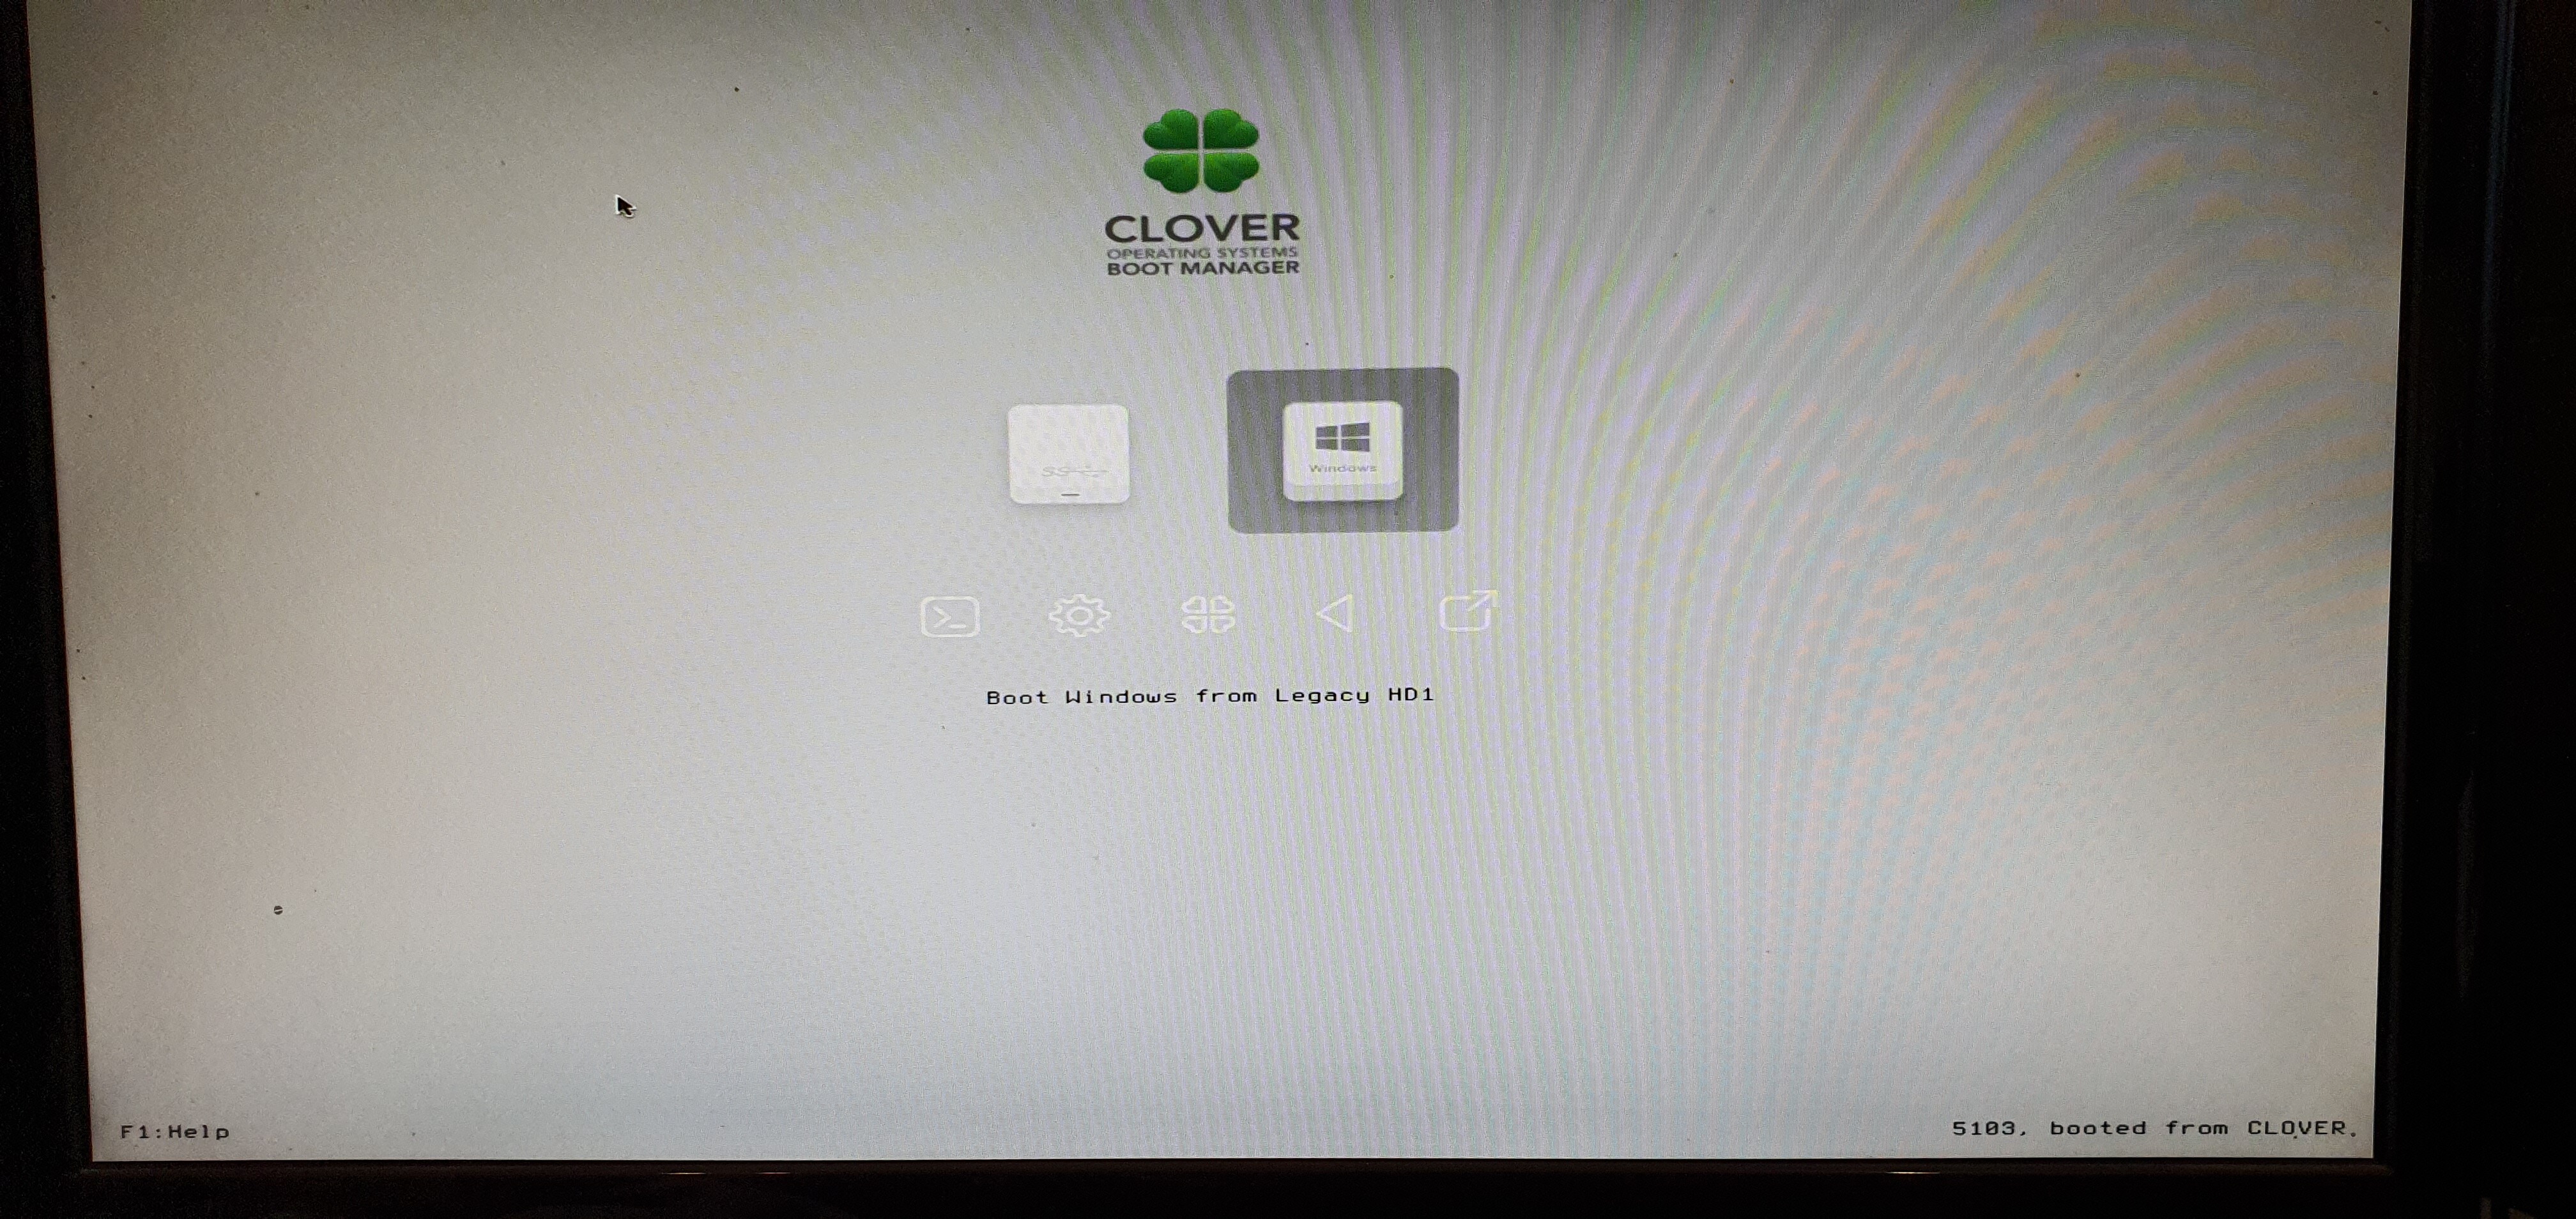 clover efi partition on usb drive